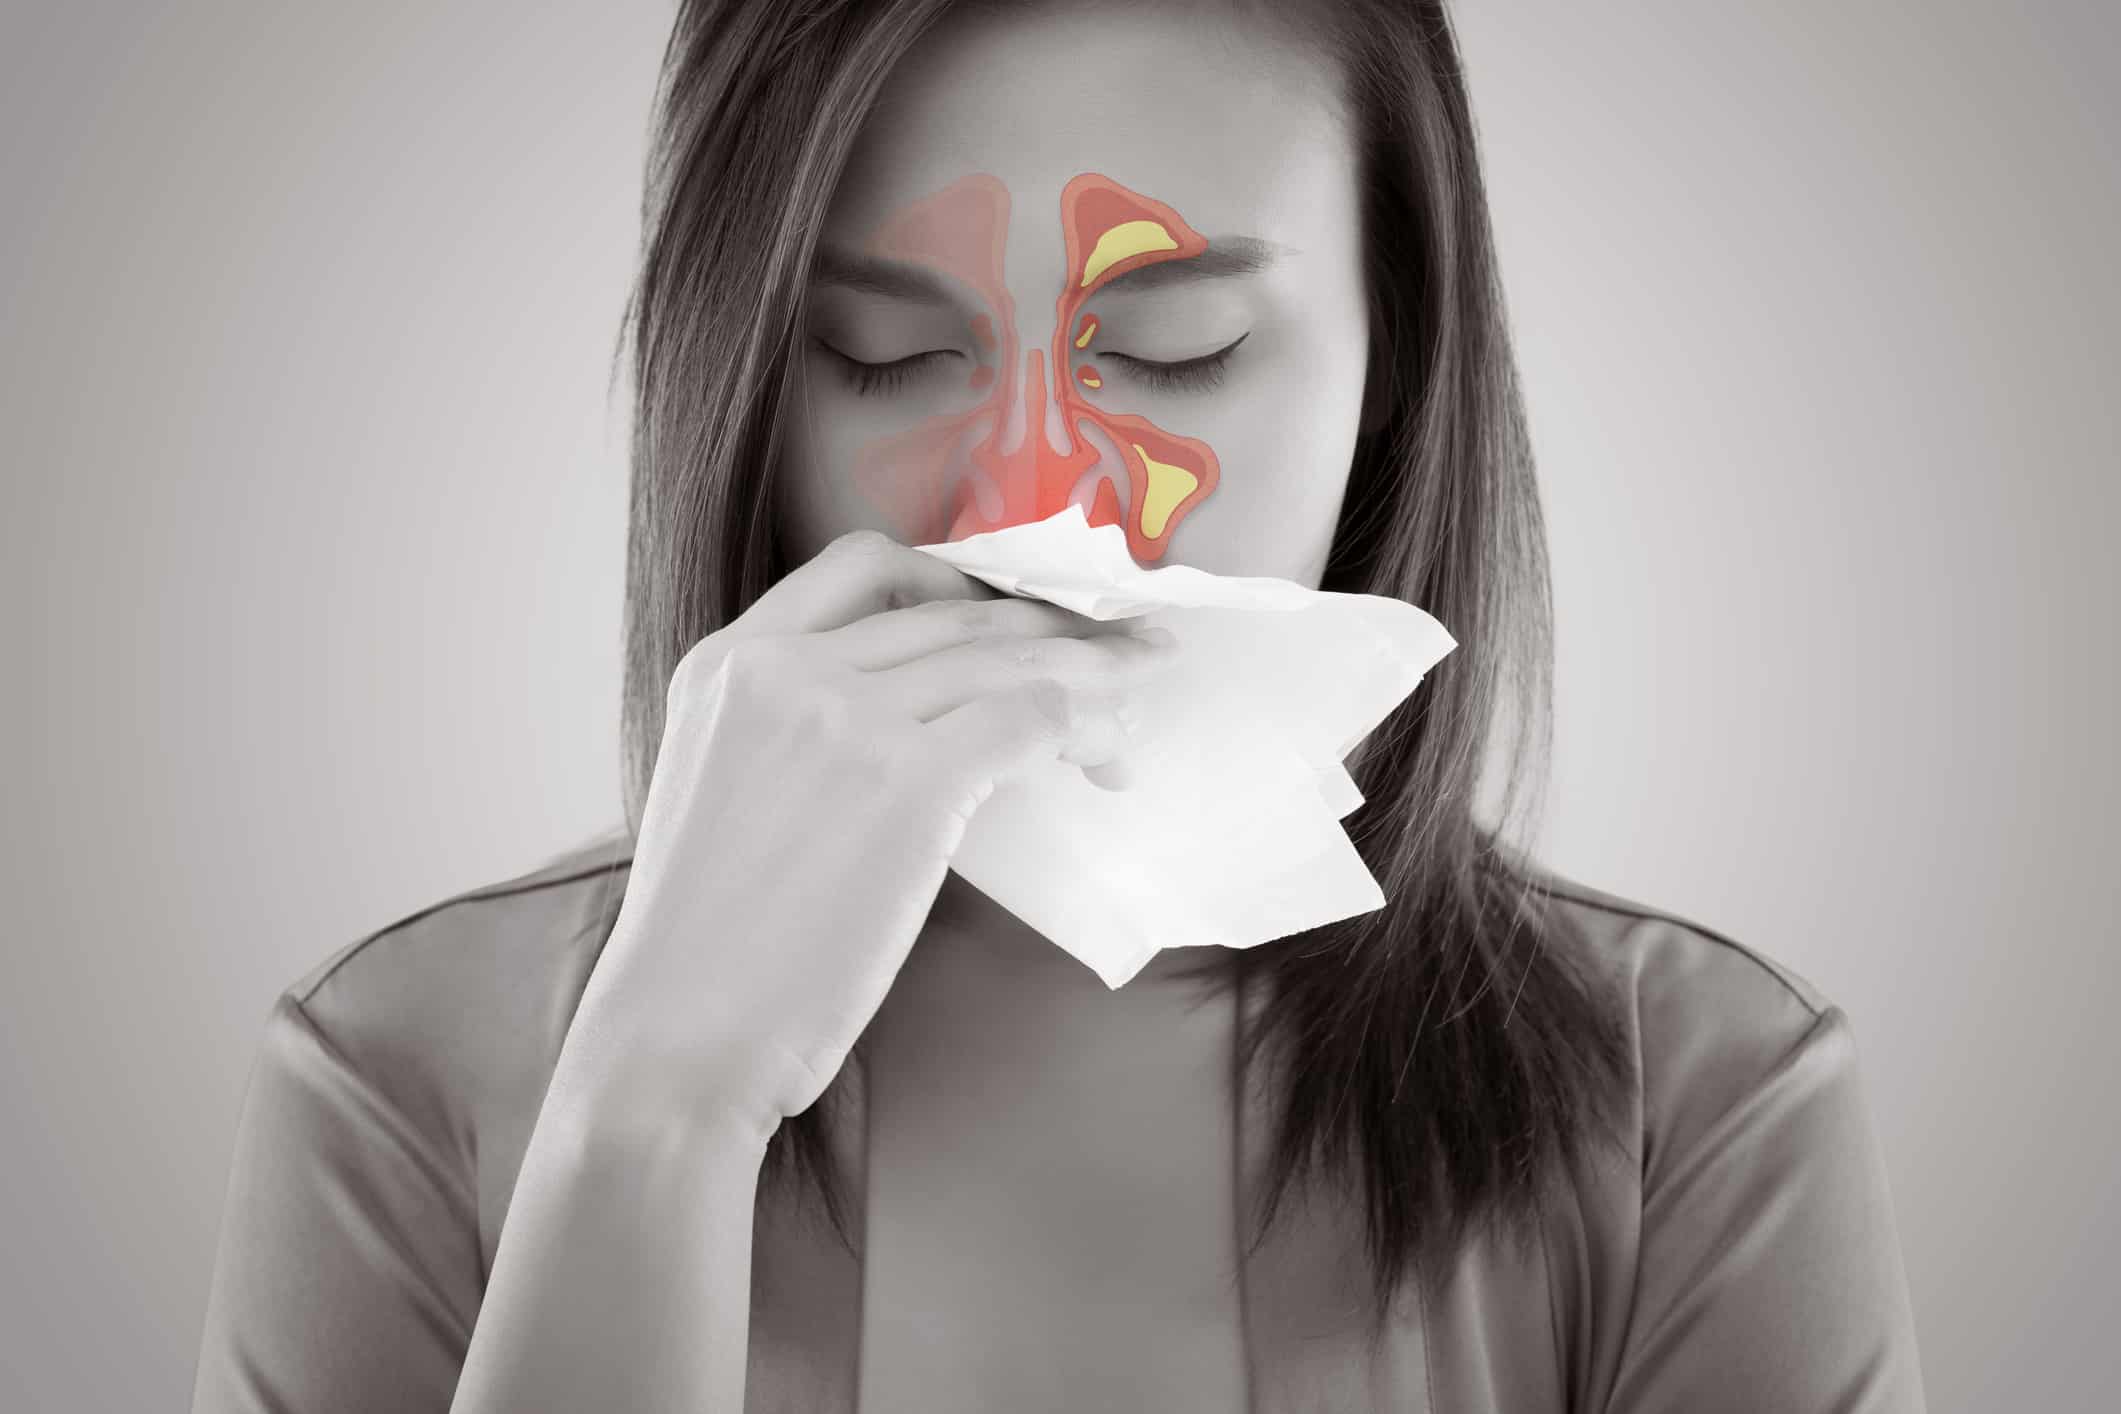 A Novel Patient-Reported Outcome Measure for Chronic Rhinosinusitis